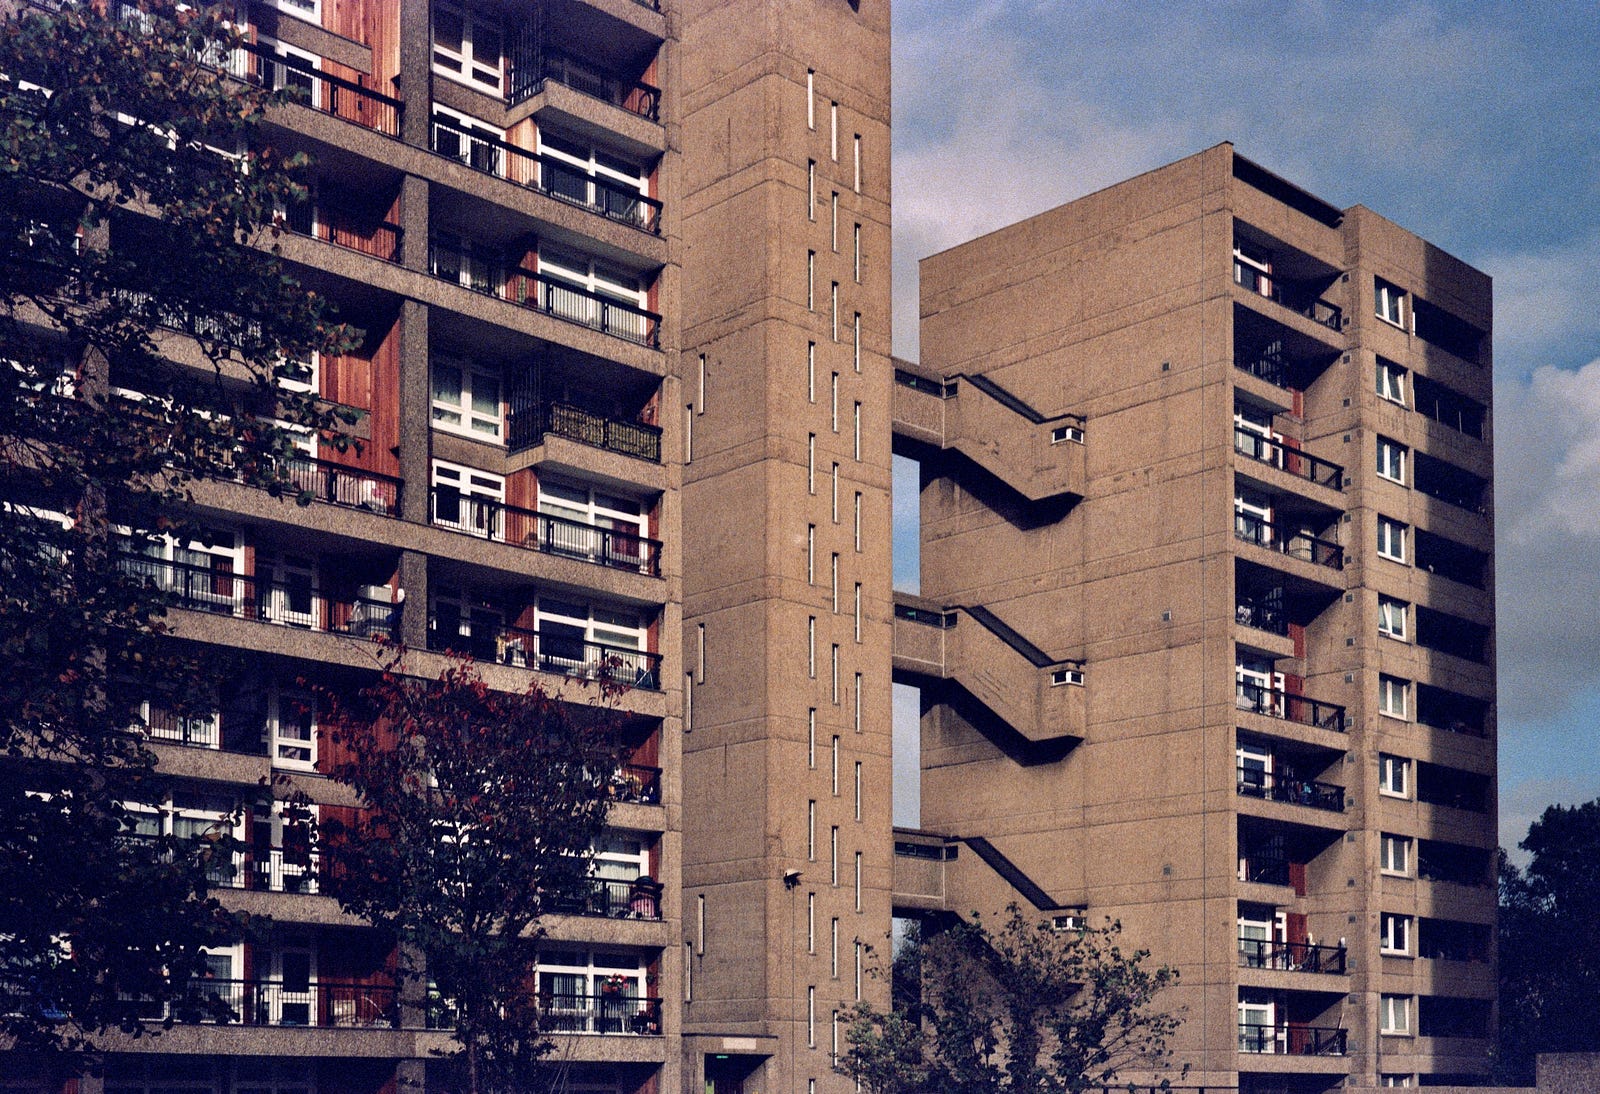 A colour photograph of the lower floors of the Balfron Tower in east London.